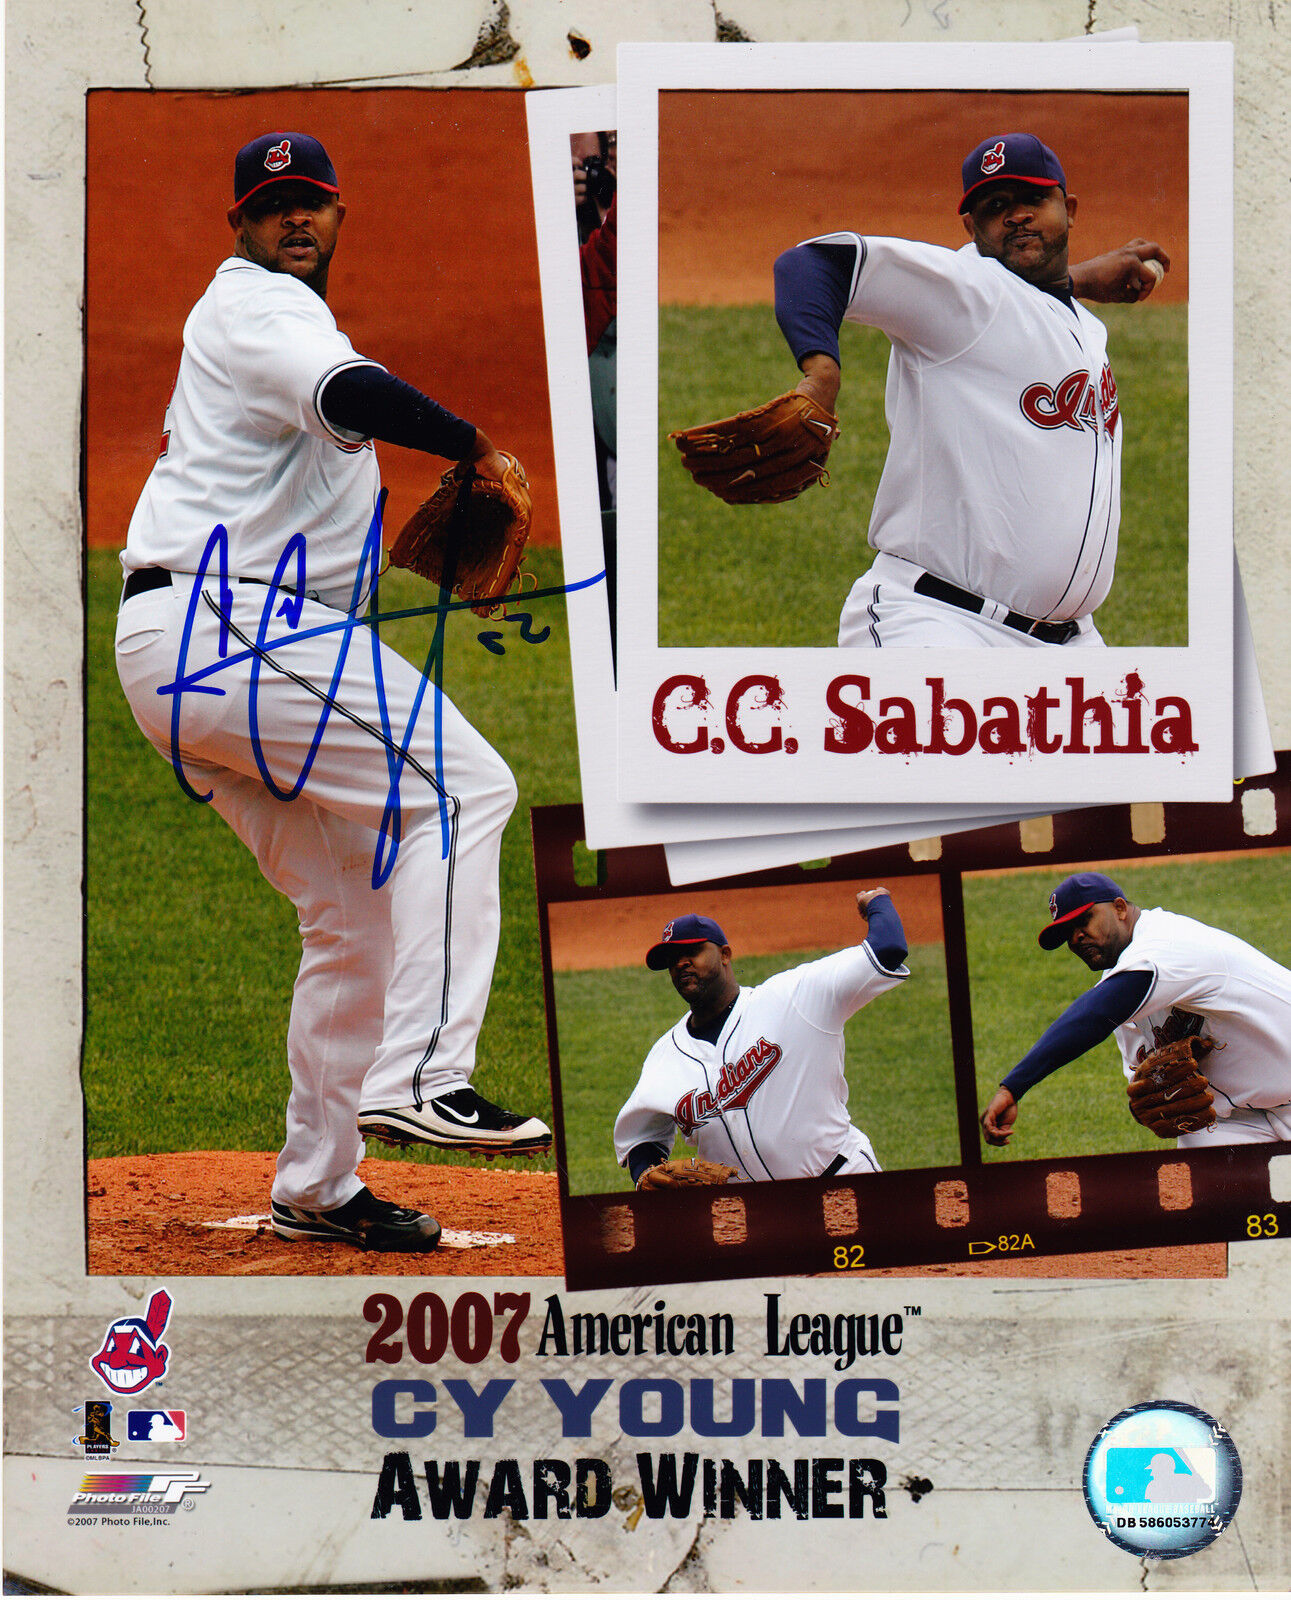 C.C. SABATHIA CLEVELAND INDIANS 2007 CY YOUNG ACTION SIGNED 8x10